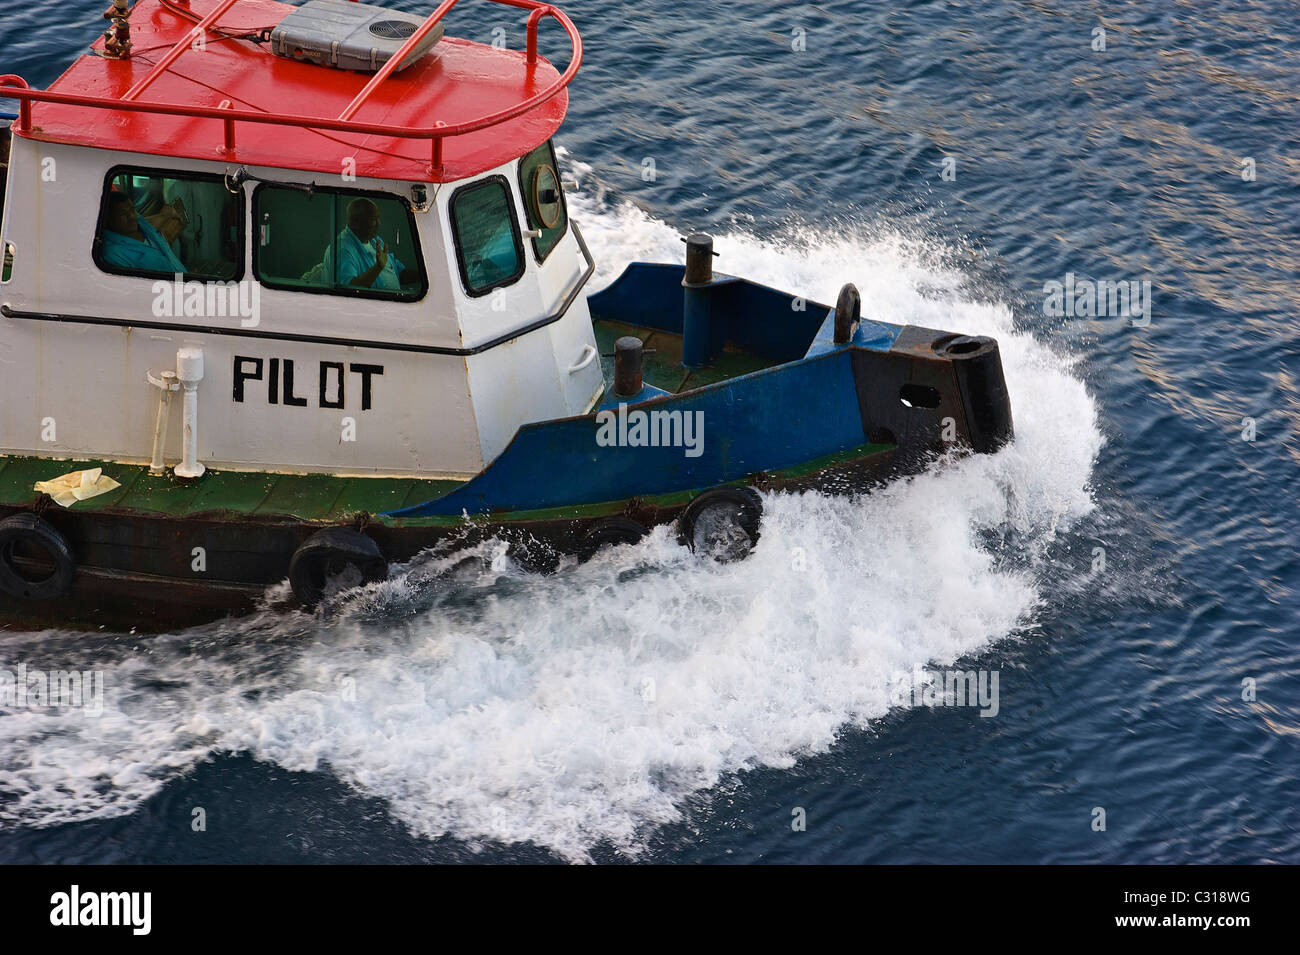 pilot boat on the Panama Canal guiding ships through the canal Stock Photo